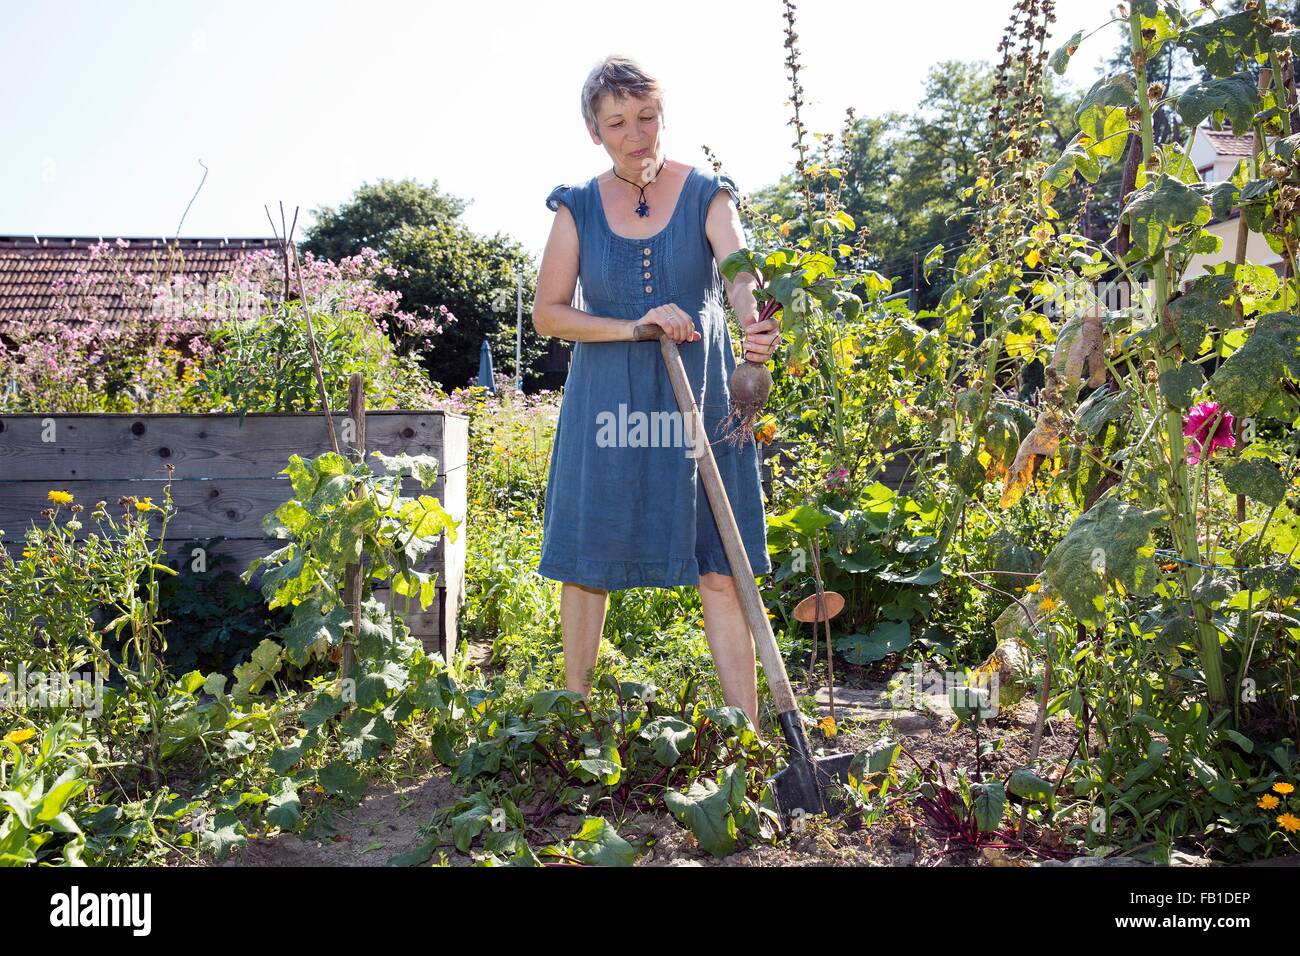 Mature woman gardening, digging with spade, holding vegetable in hand Stock Photo